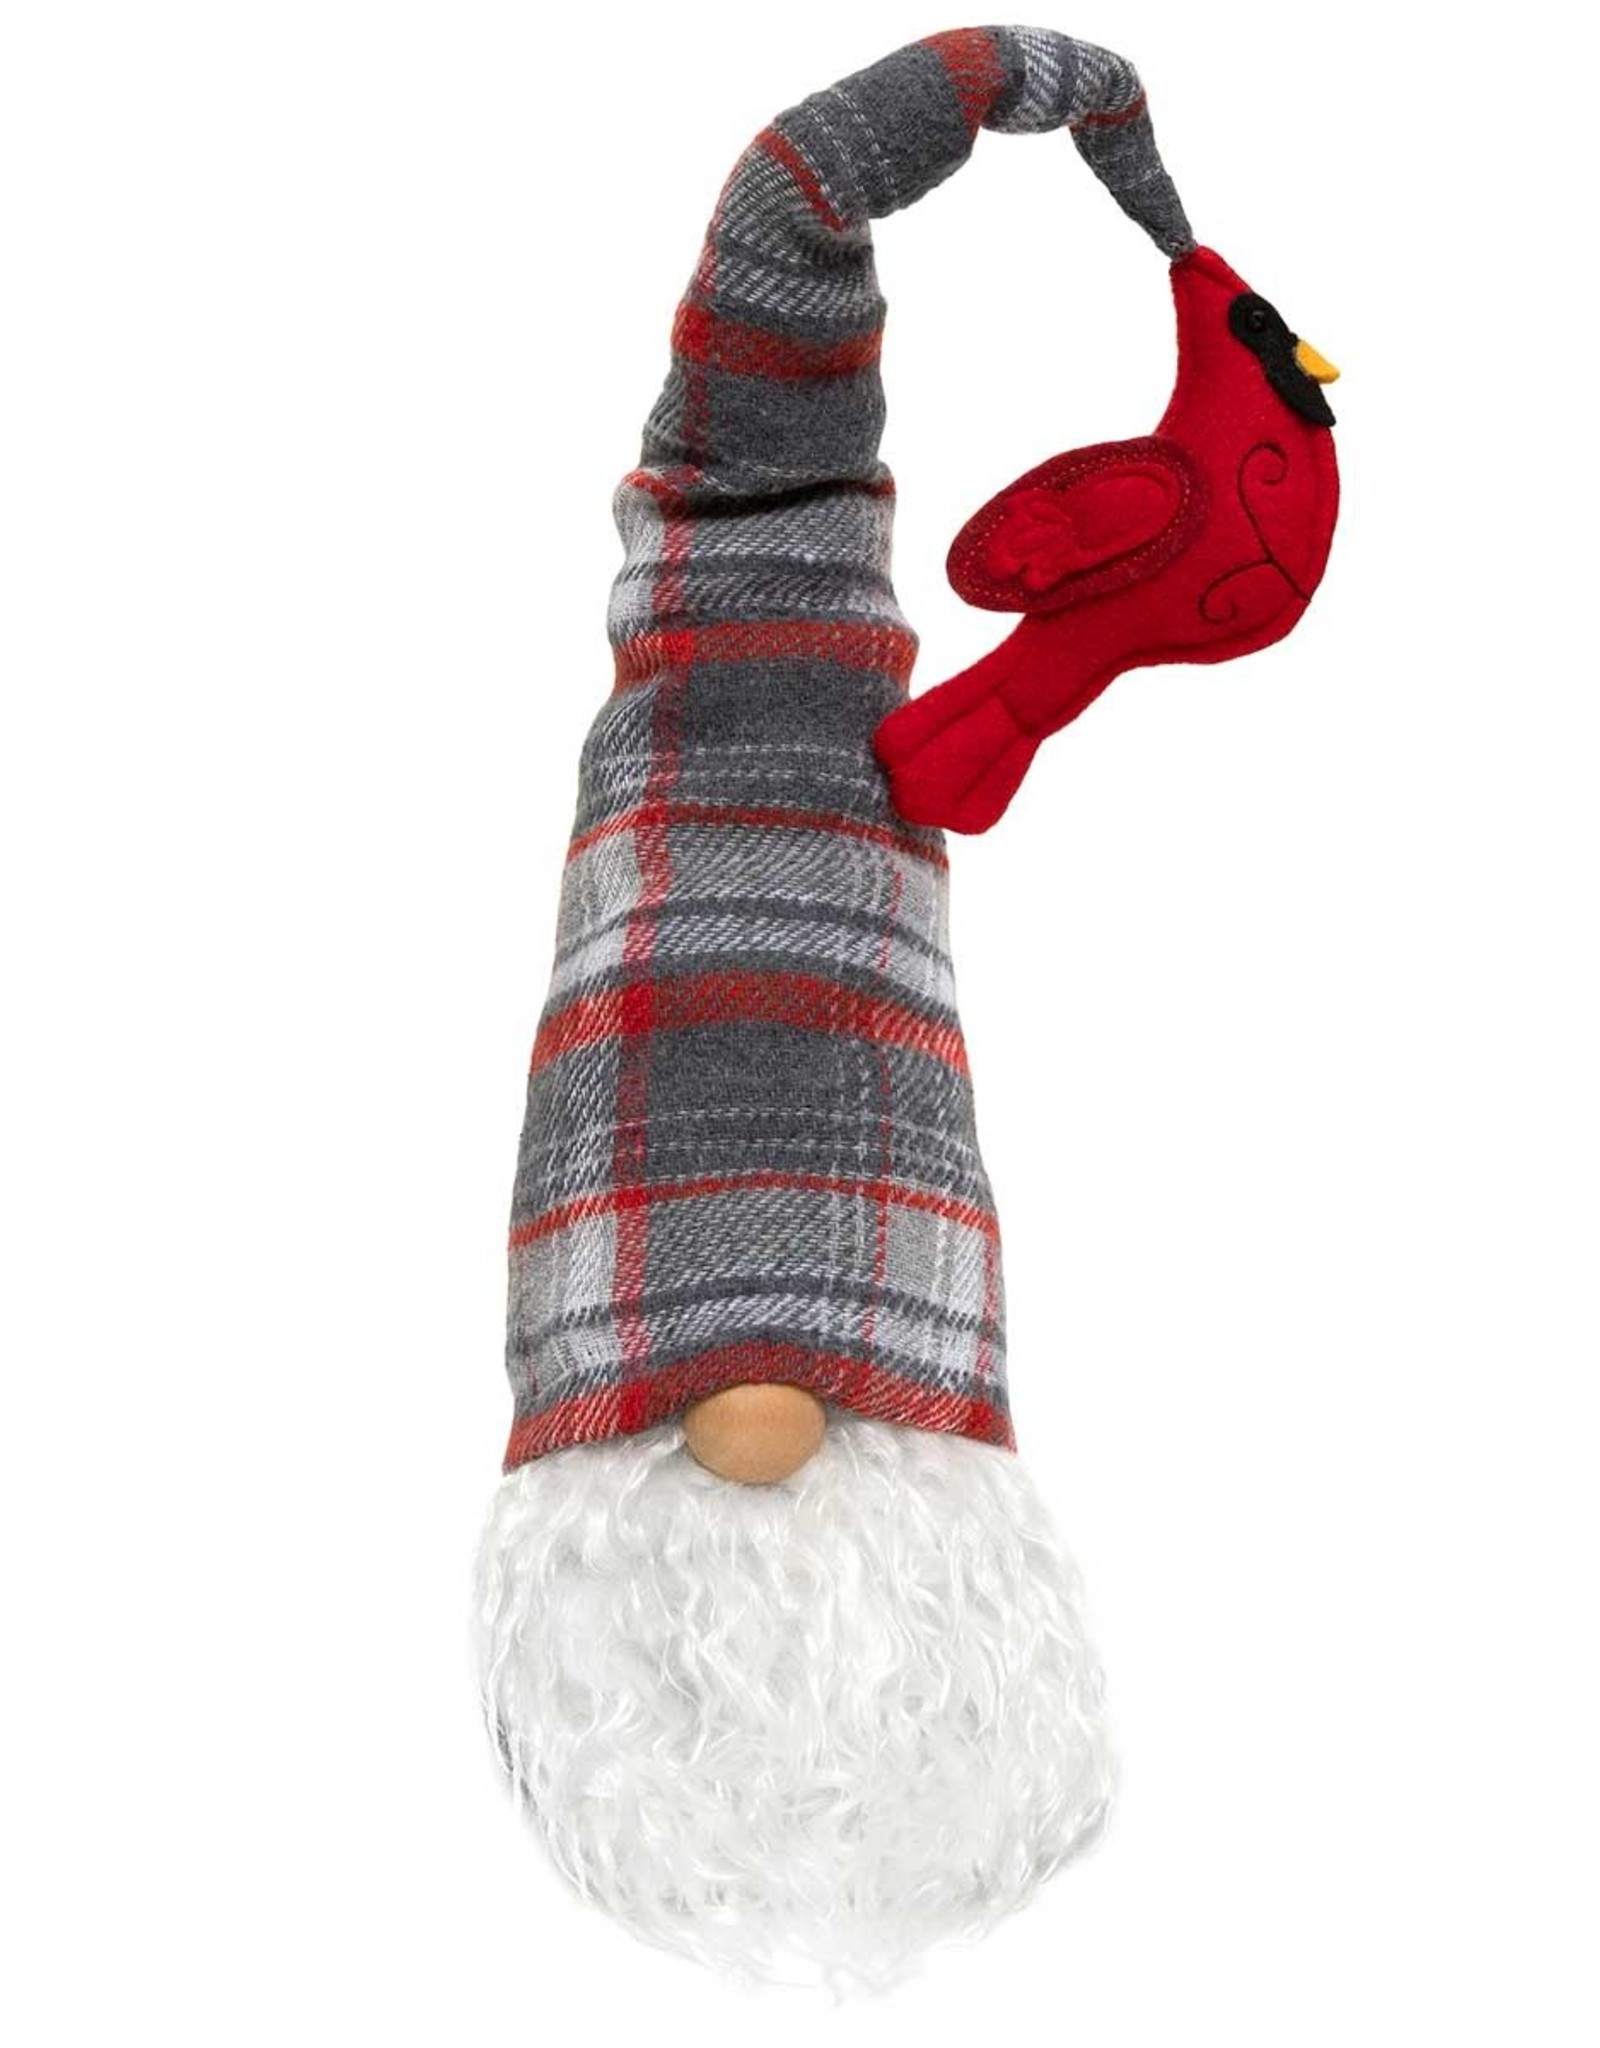 Meravic SALE 20" Cardinal Gnome with Plaid Hat